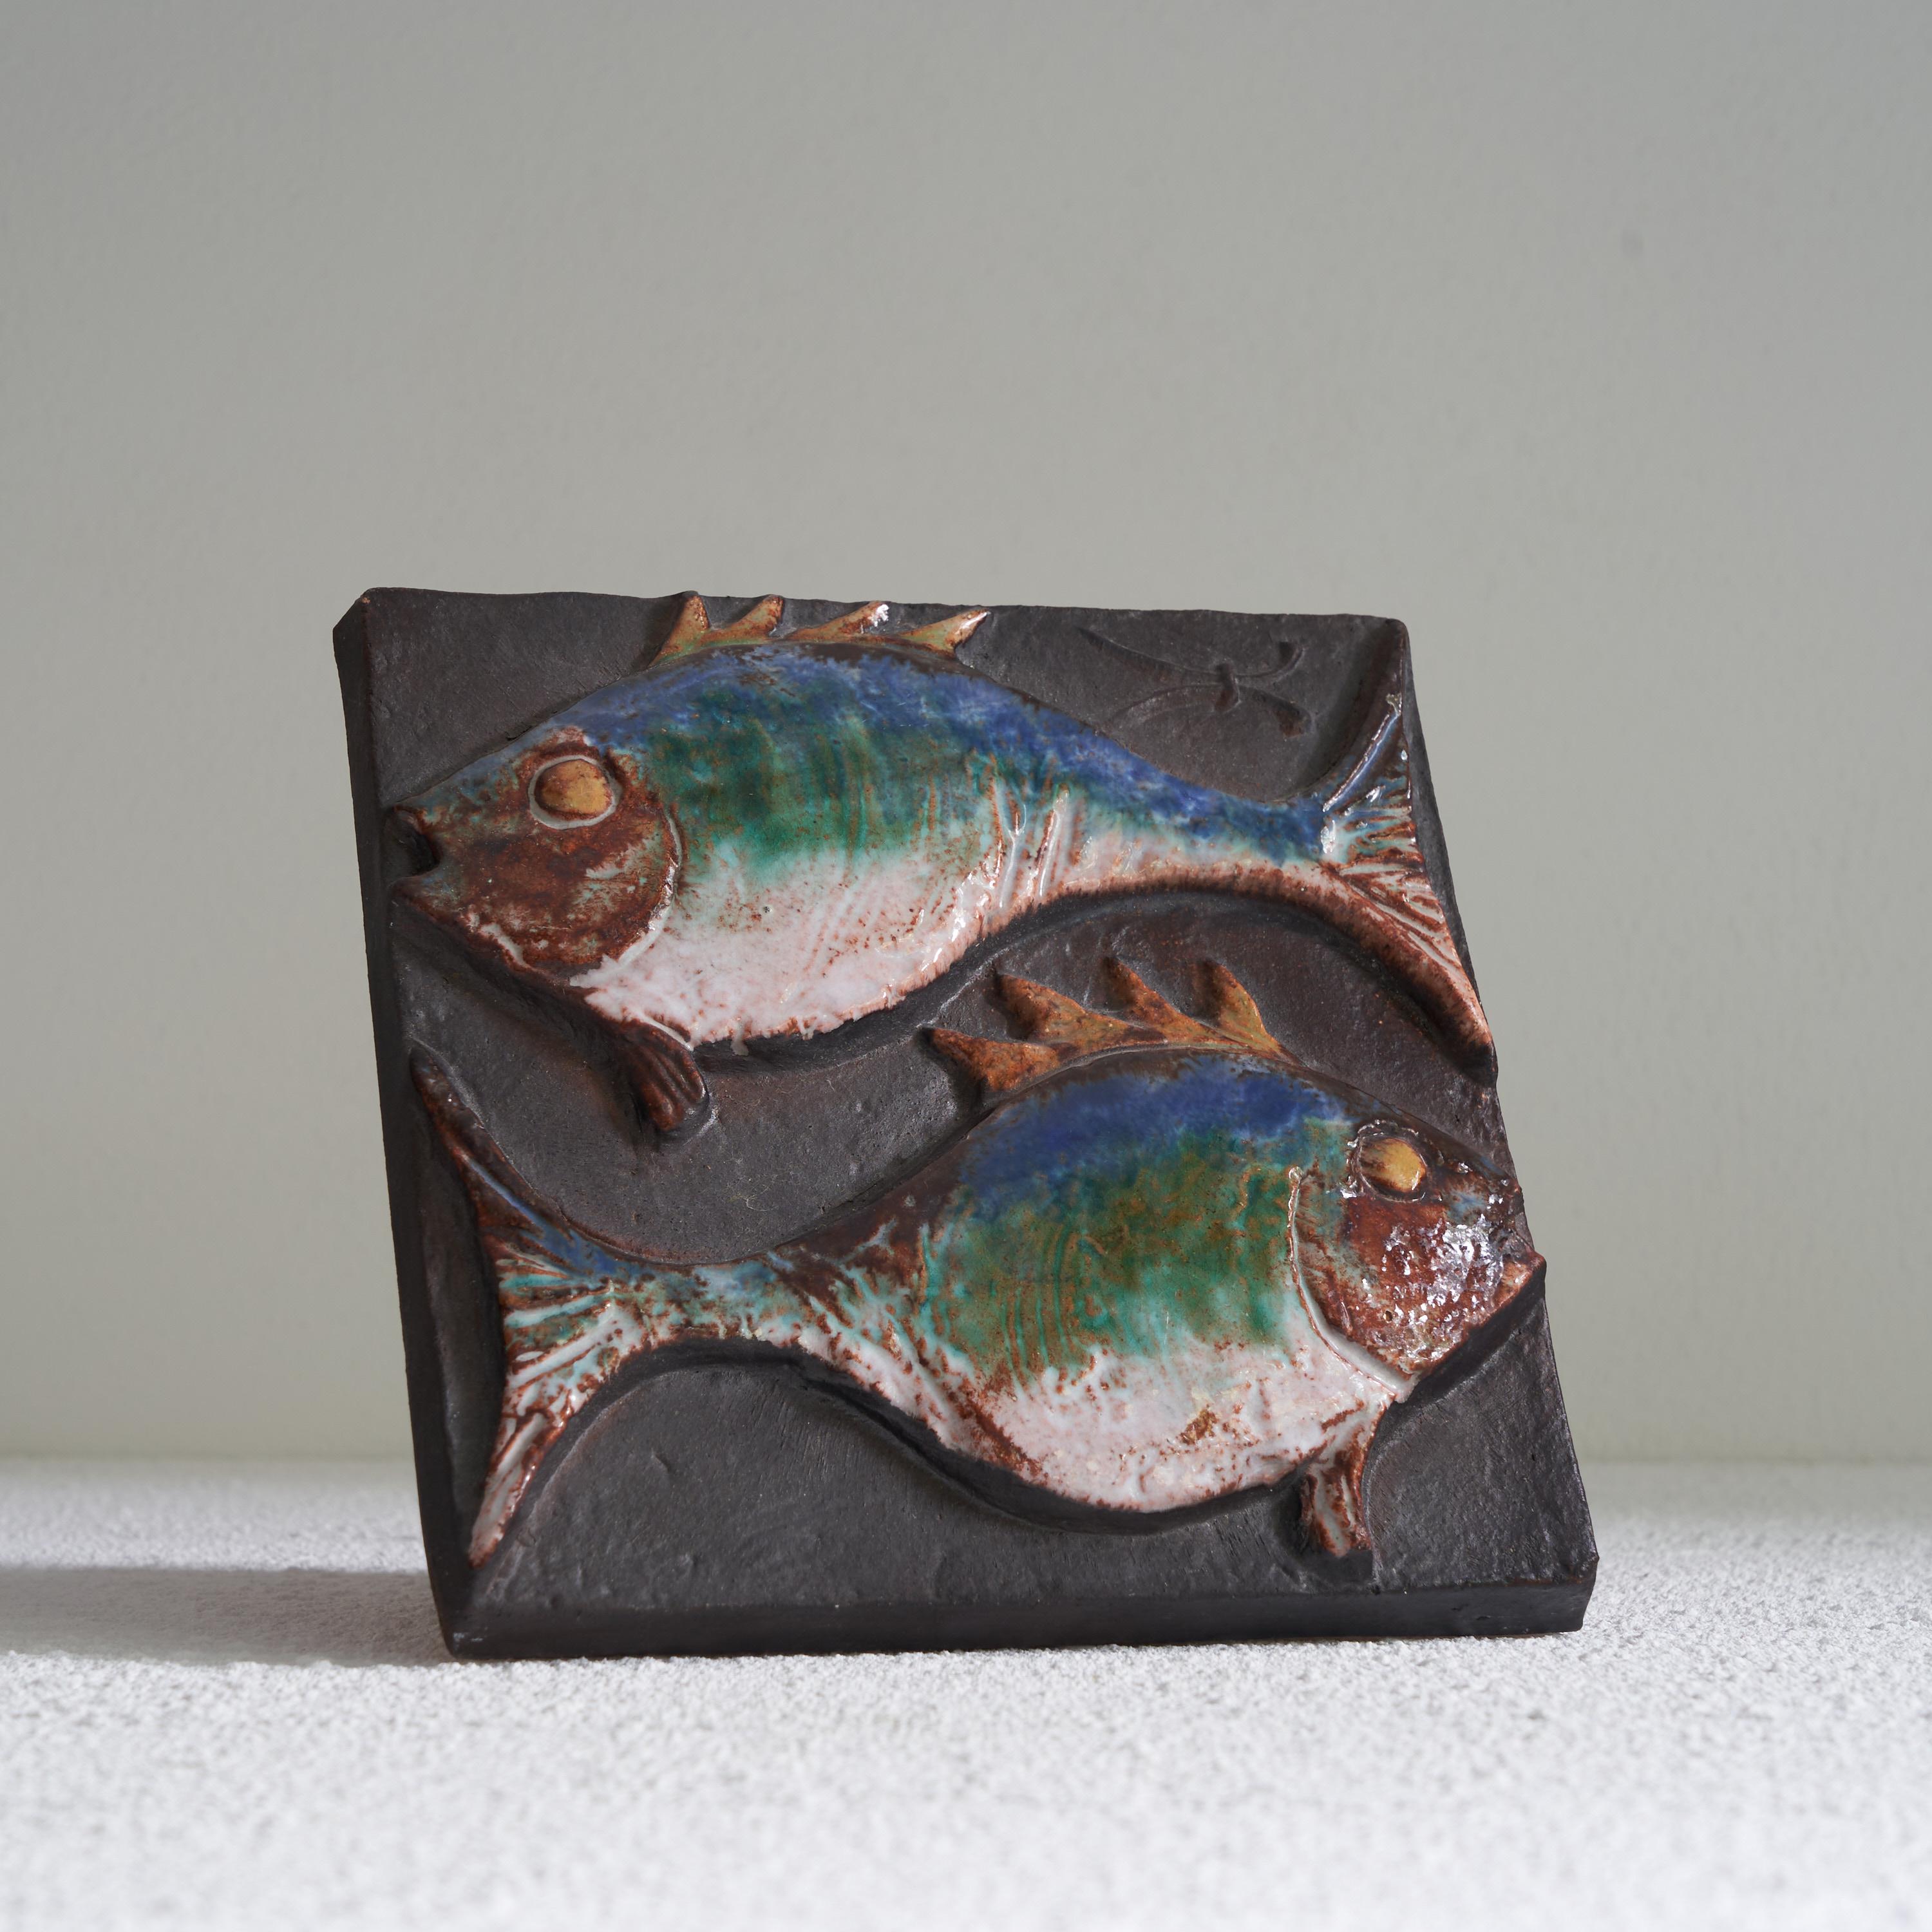 Vladimír David for Jihokera Bechyne Zodiac Tile Fishes / Pisces. Czech Republic, mid 20th century. 

This is a great mid-century studio pottery tile depicting the Zodiac sign of the Fishes / Pisces. It was made by the pottery workshop Johokera